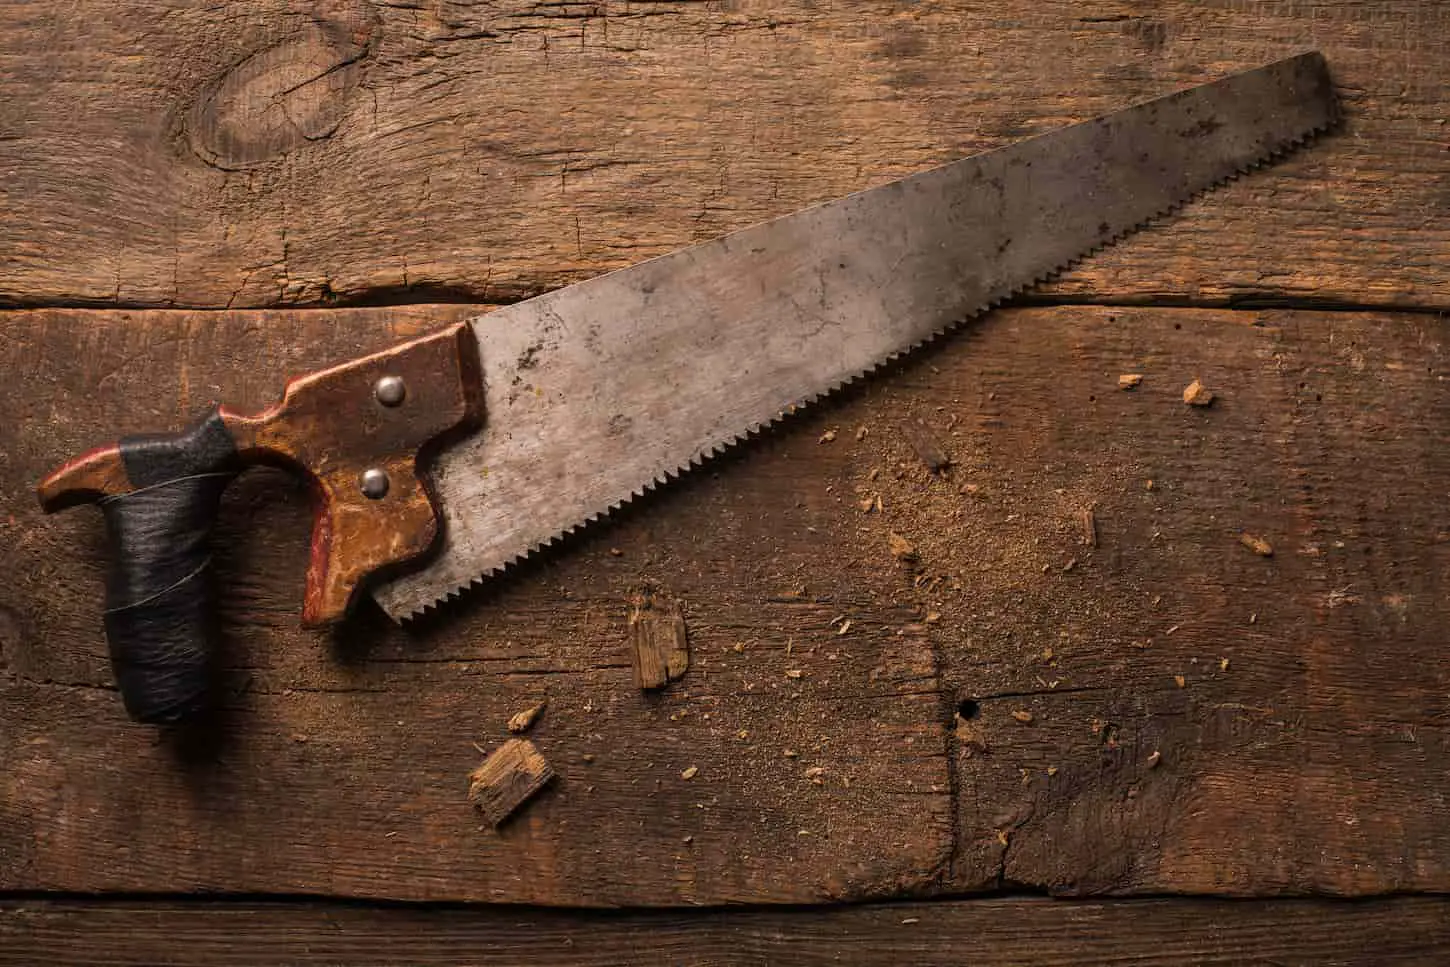 An image of a carpenter's rusty handsaw on a wooden table.